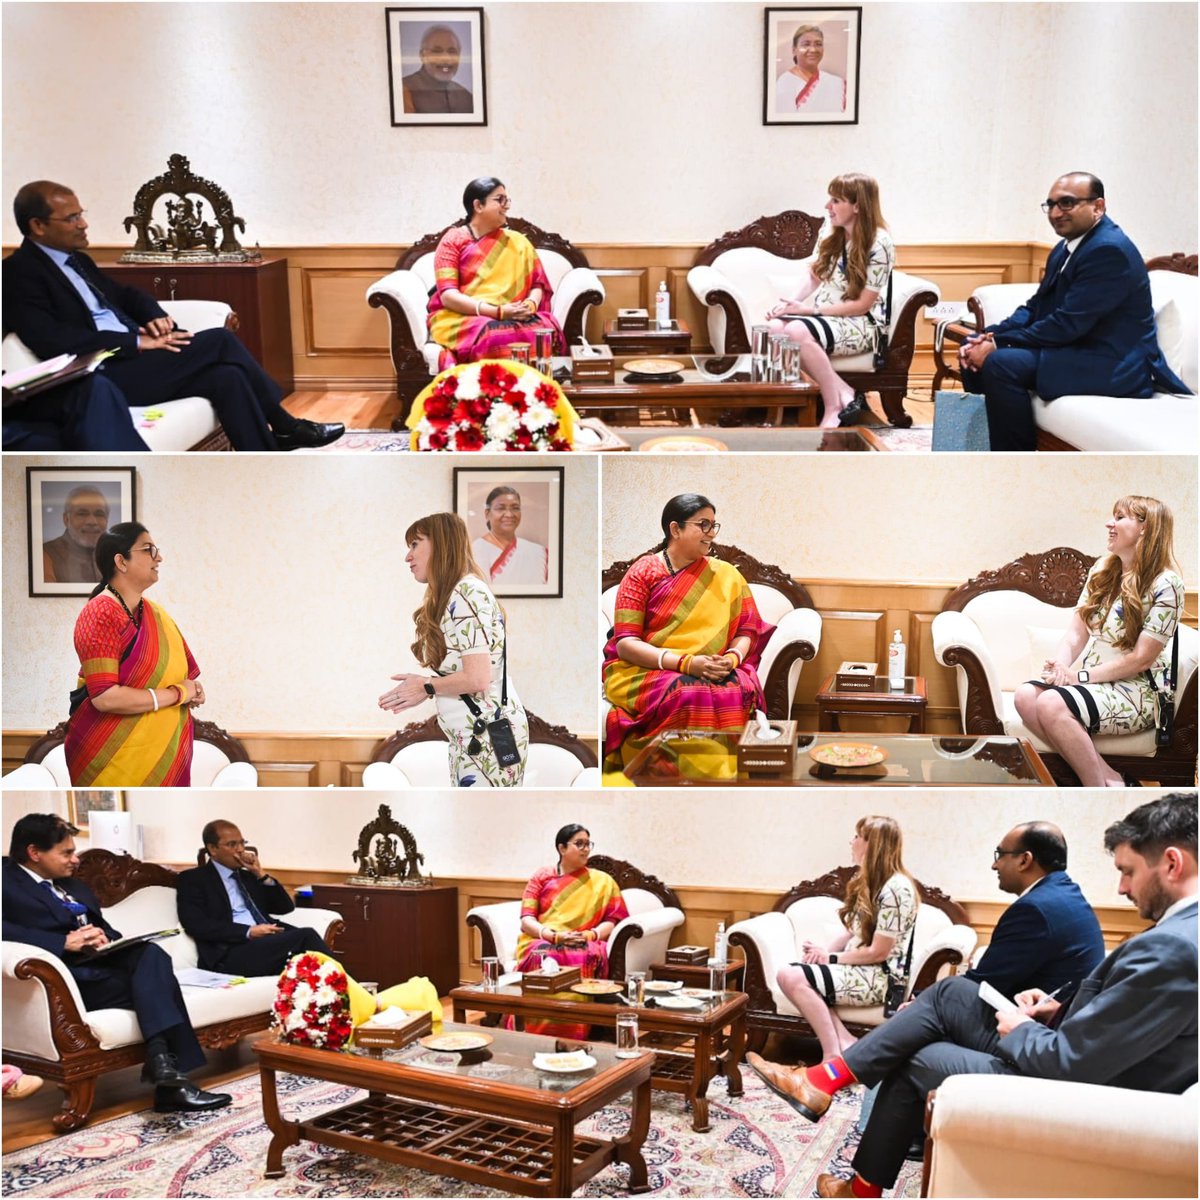 Had a fruitful discussion today with Ms. @AngelaRayner, Shadow Deputy Prime Minister & Deputy Leader of the Labour Party, United Kingdom. She lauded India’s governmental initiatives on constructively addressing issues relating to the well-rounded development of women and…